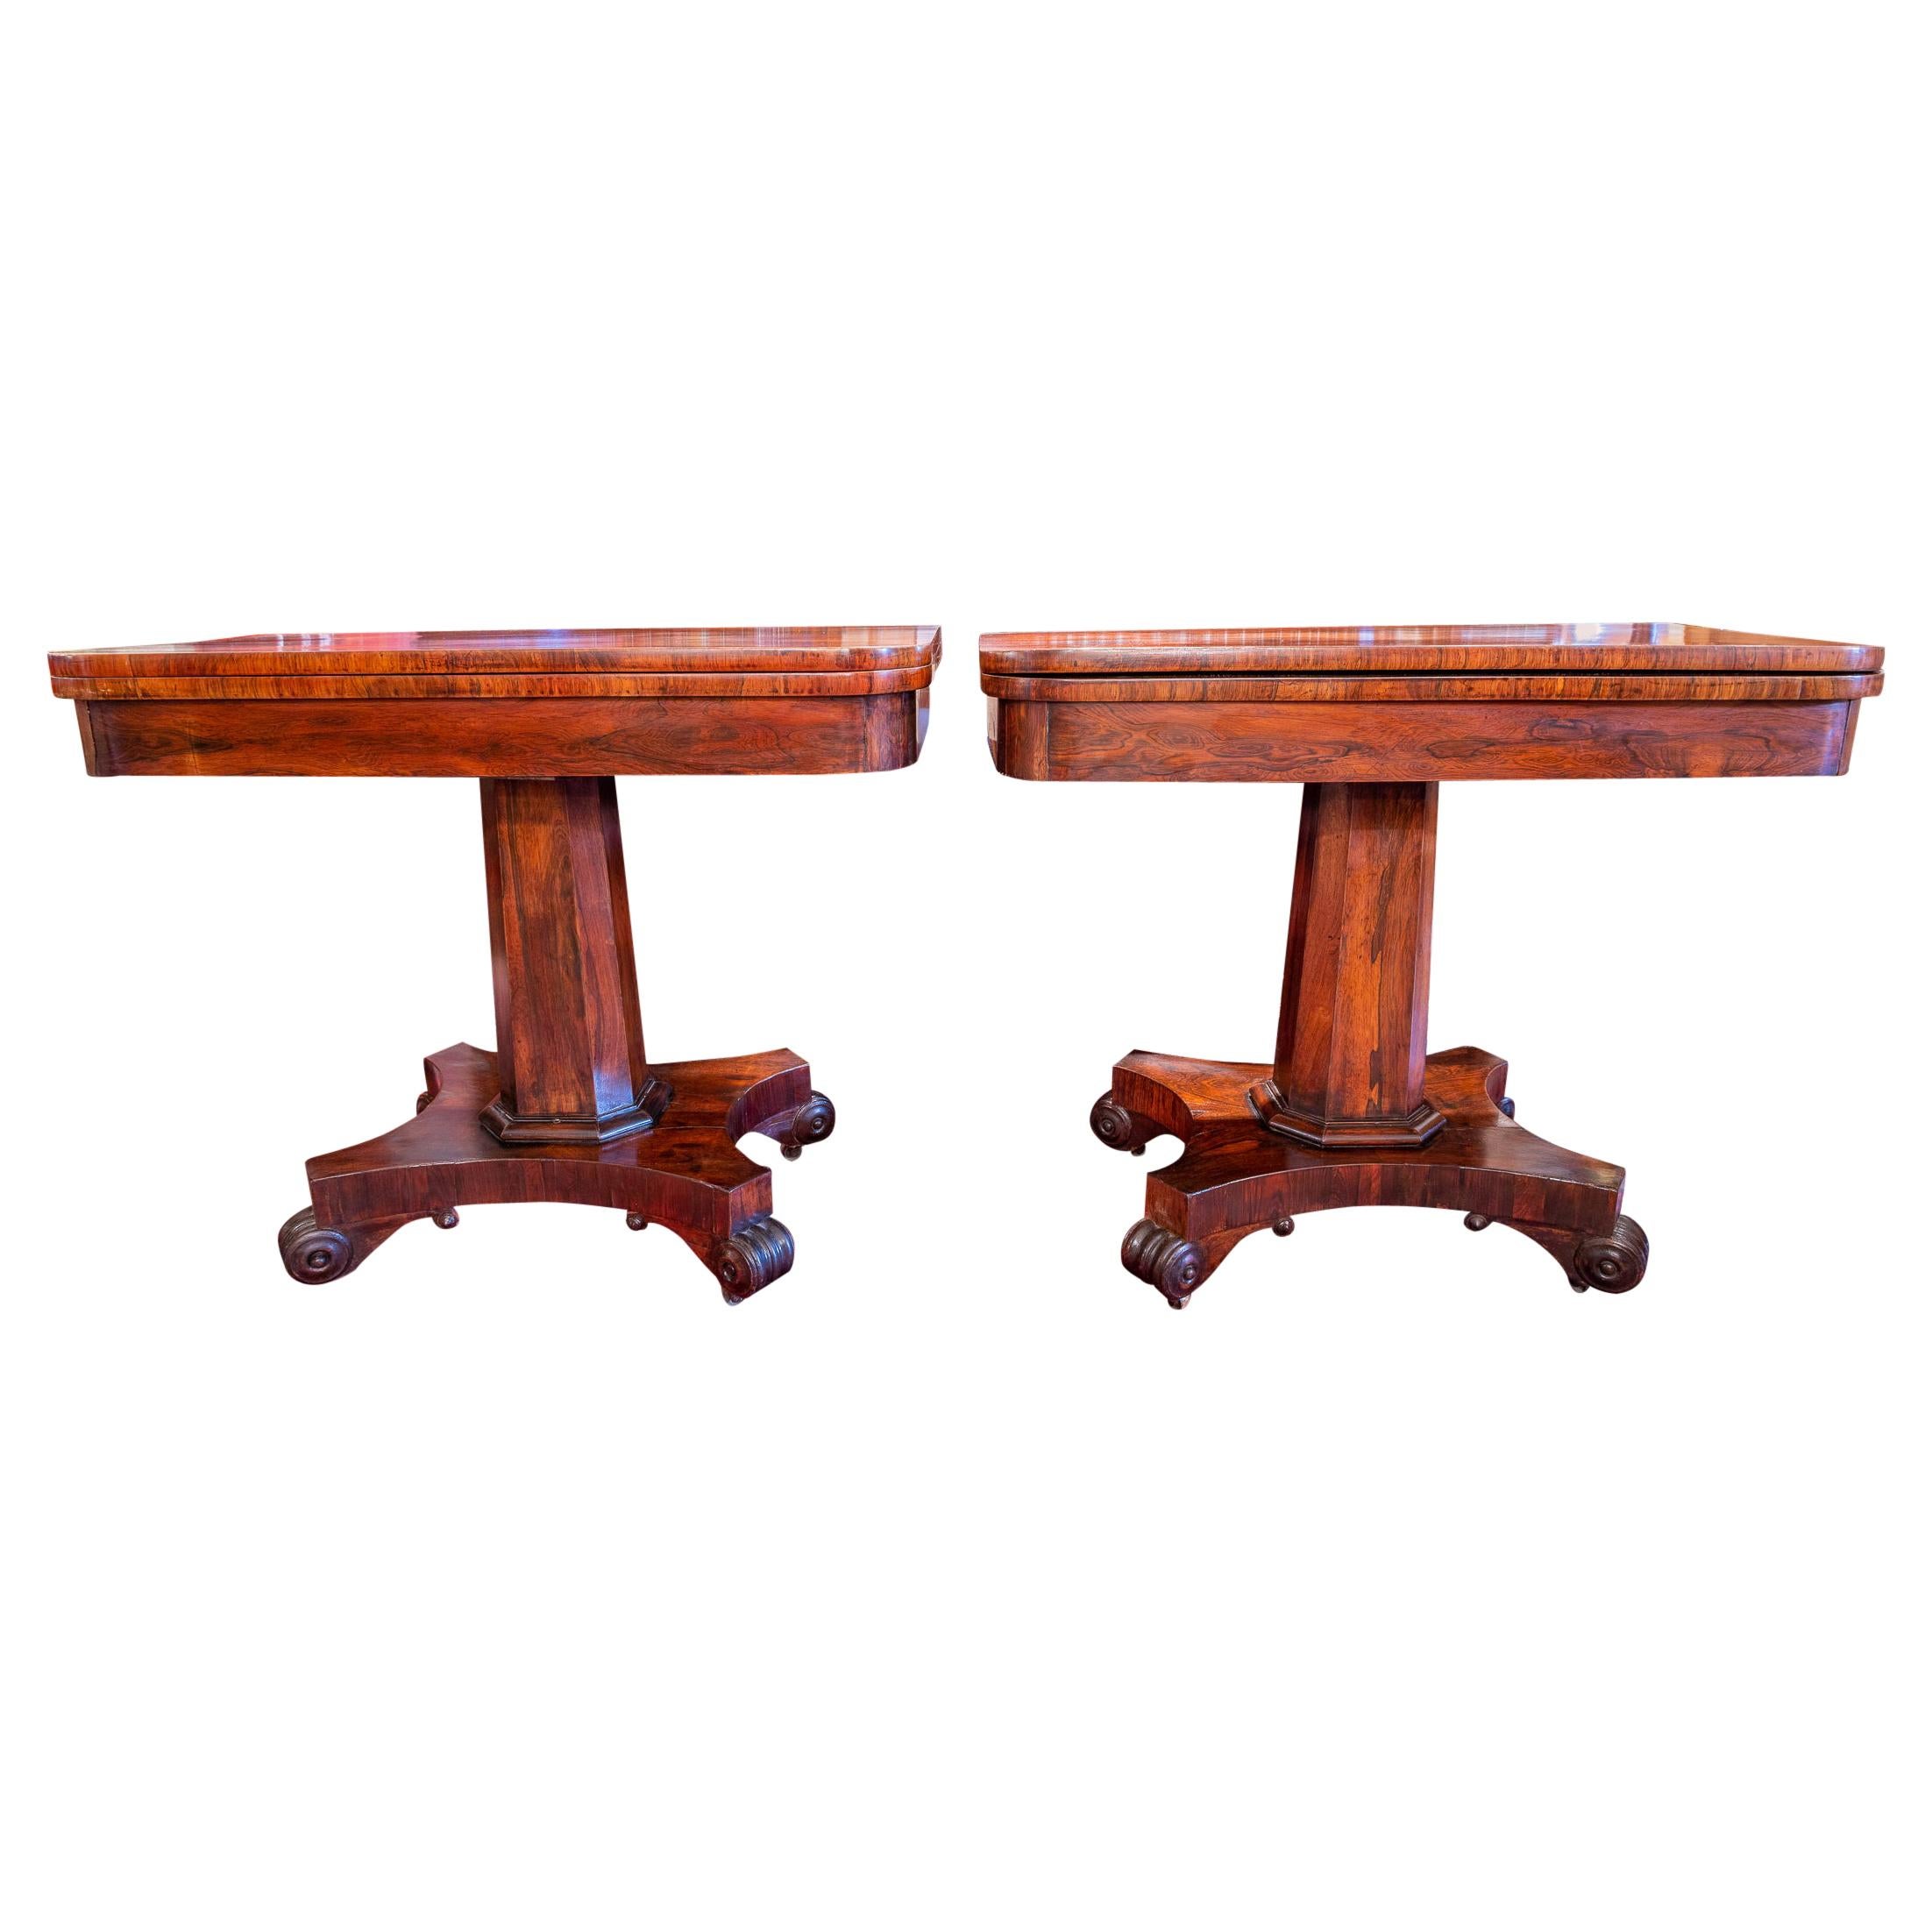 Fine Pair of Regency Period Rosewood Games Tables, Signed Phenes & Williamson For Sale